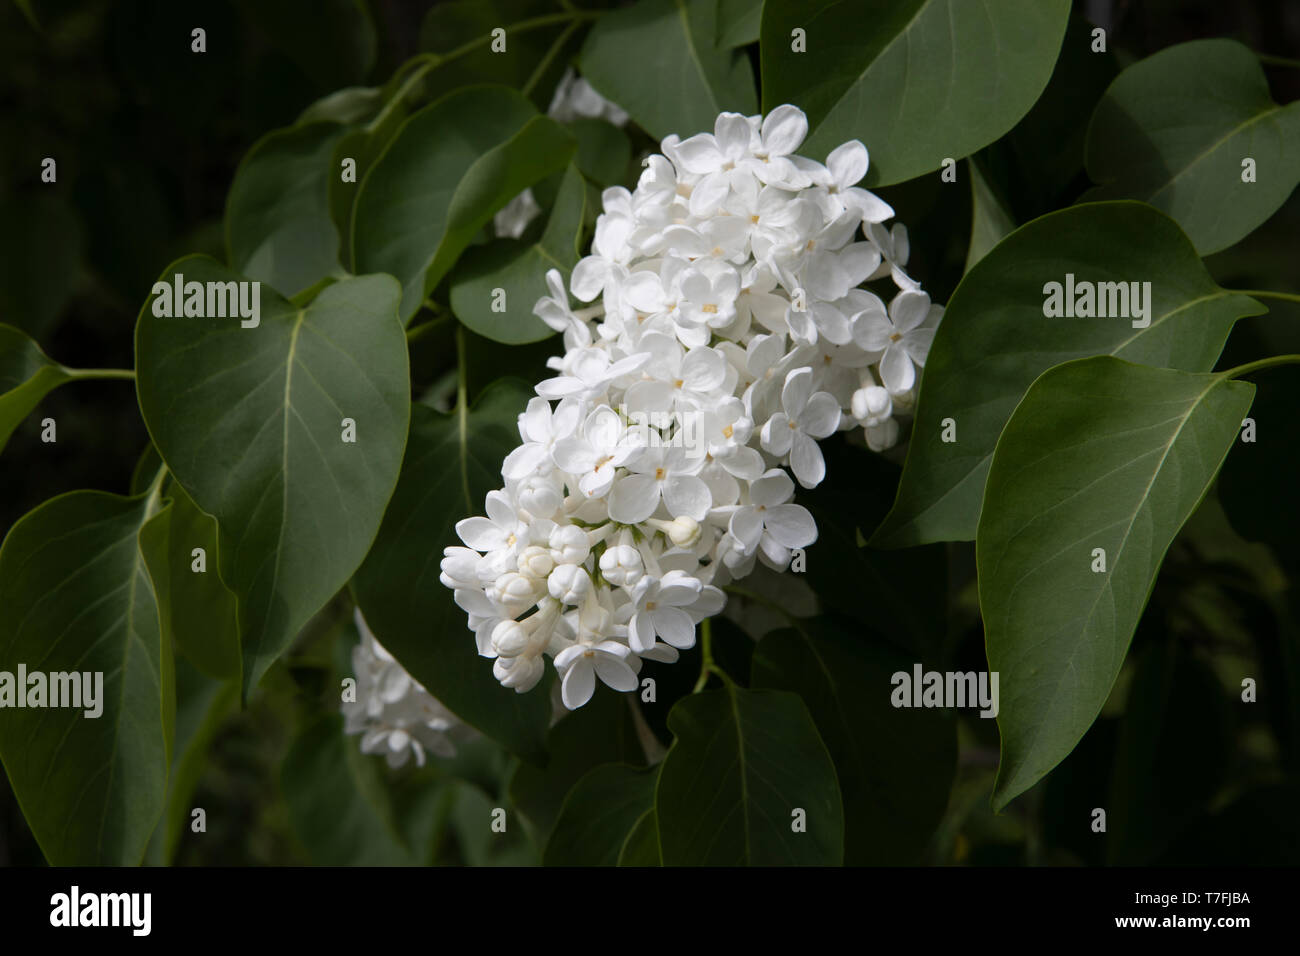 Common lilac, Syringa vulgaris, white flower, close up. Cluster on brunch with leaves. Stock Photo